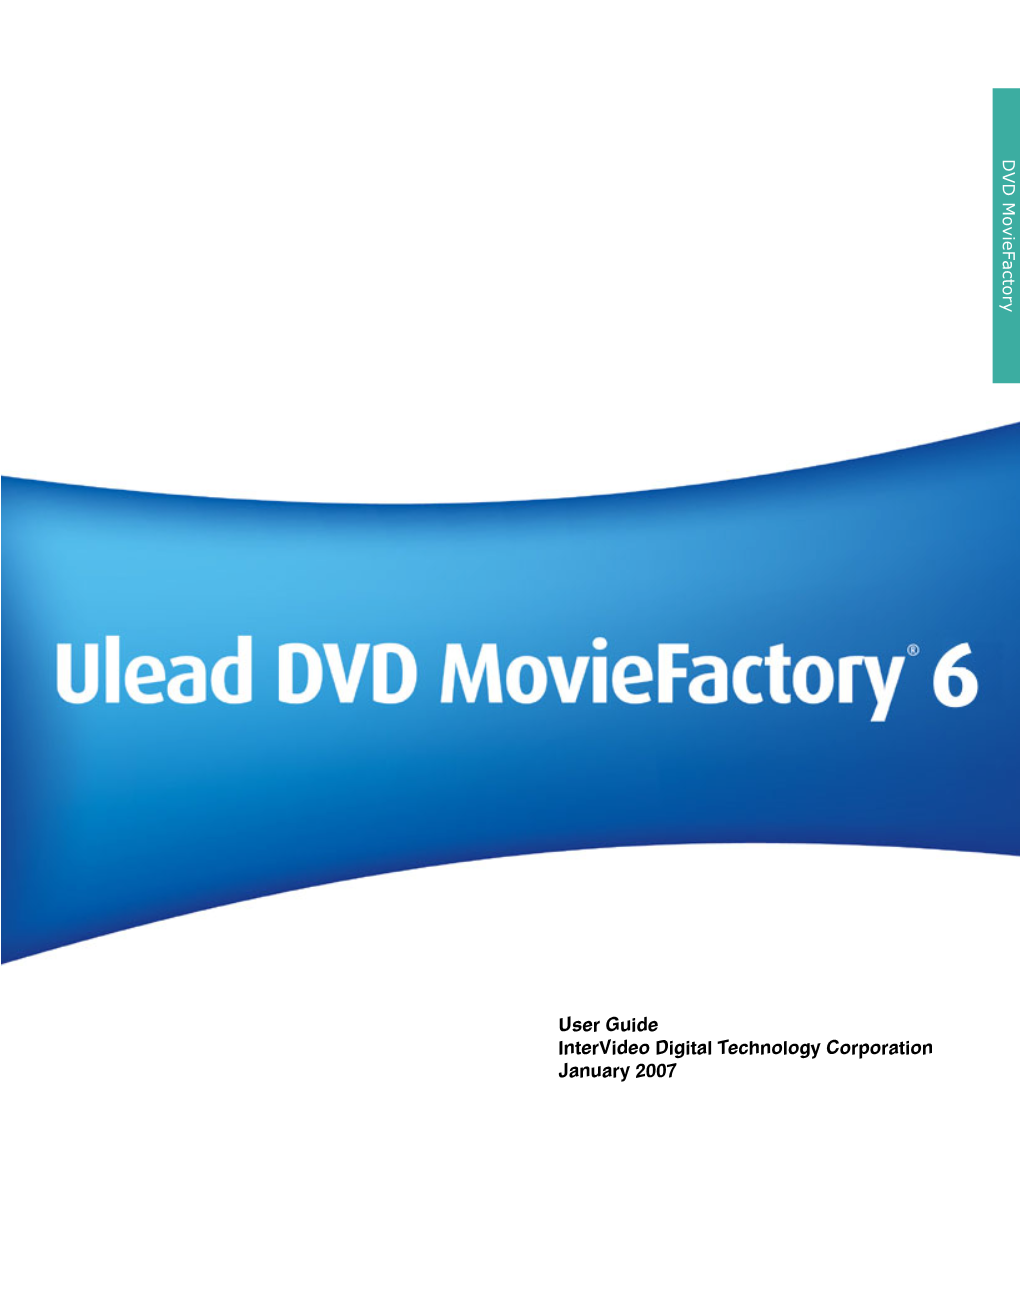 Ulead DVD Moviefactory® 6 Copyright © 2007 Intervideo Digital Technology Corporation